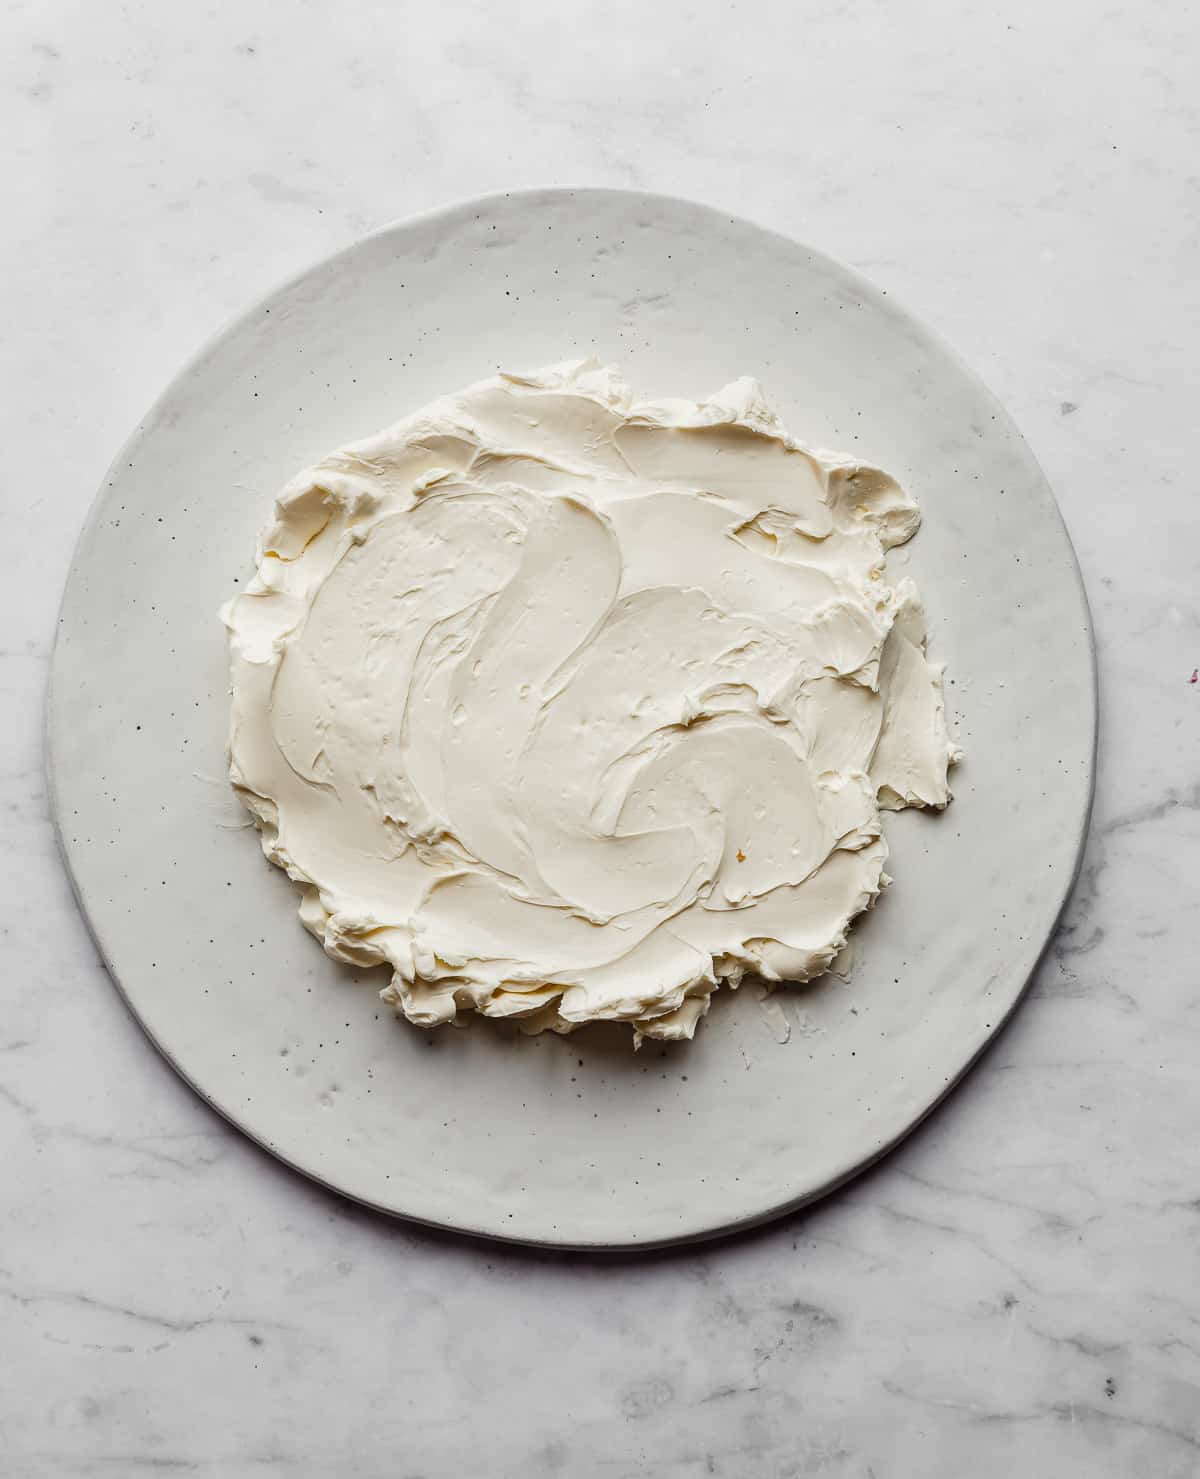 Cream cheese spread into a circle on a white plate.